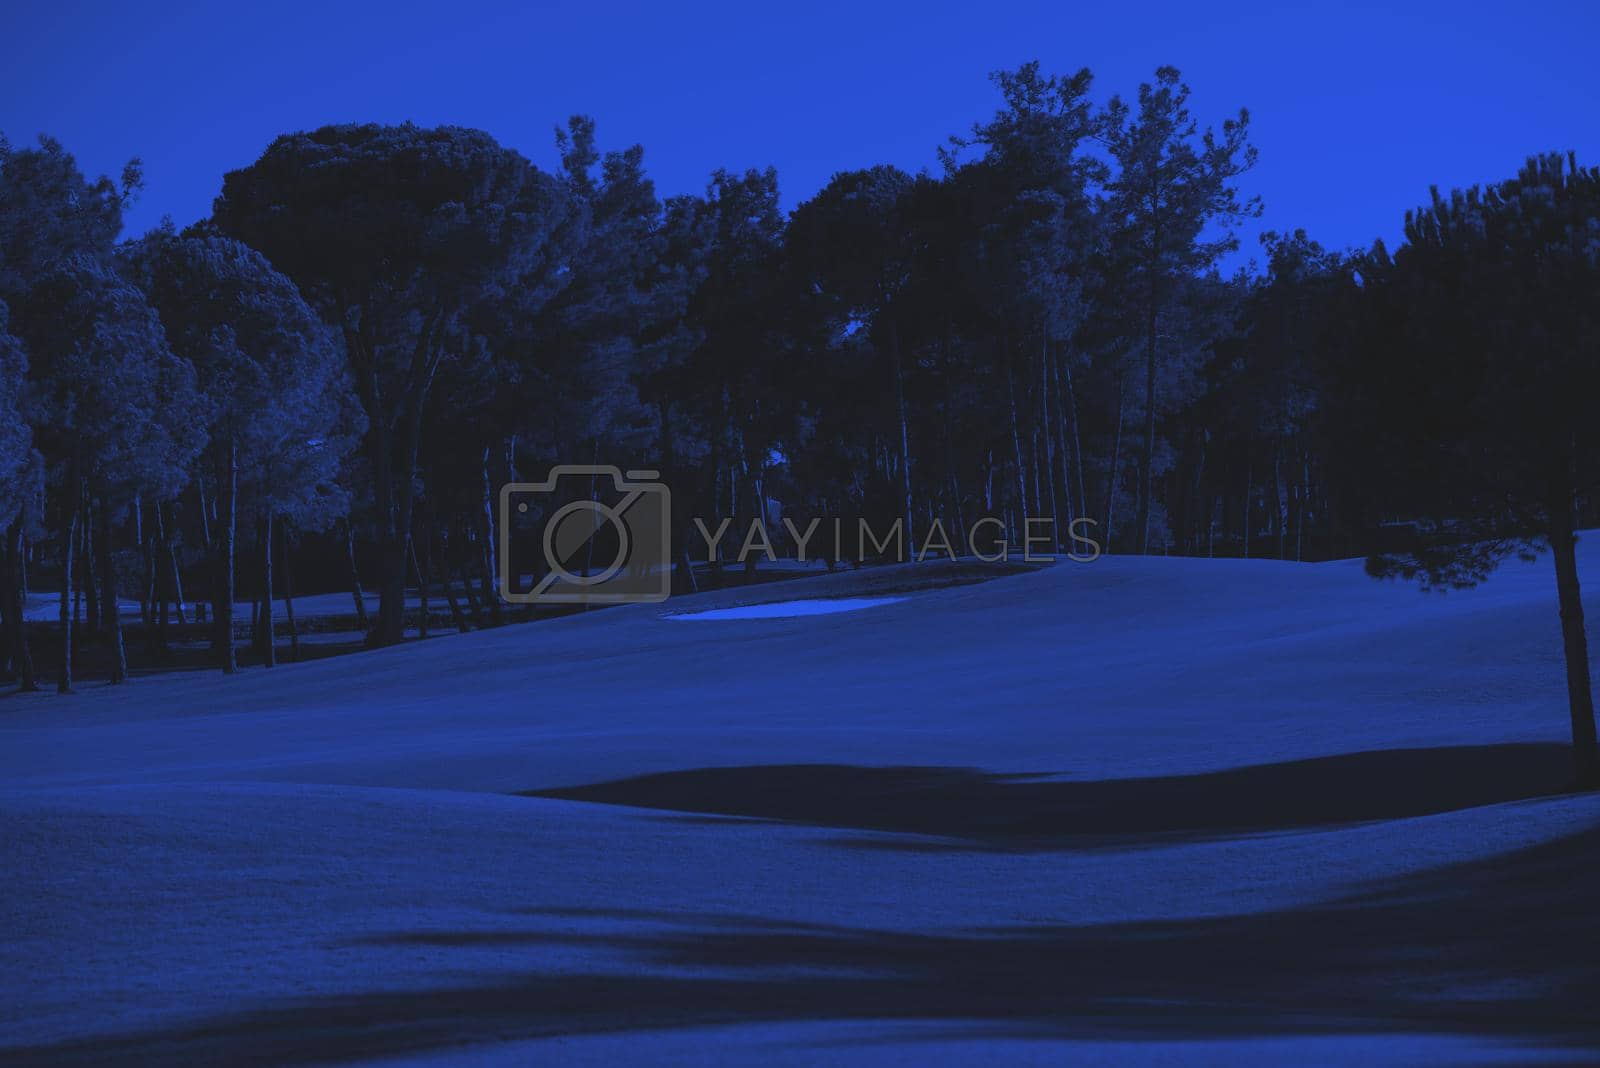 Royalty free image of golf course by dotshock